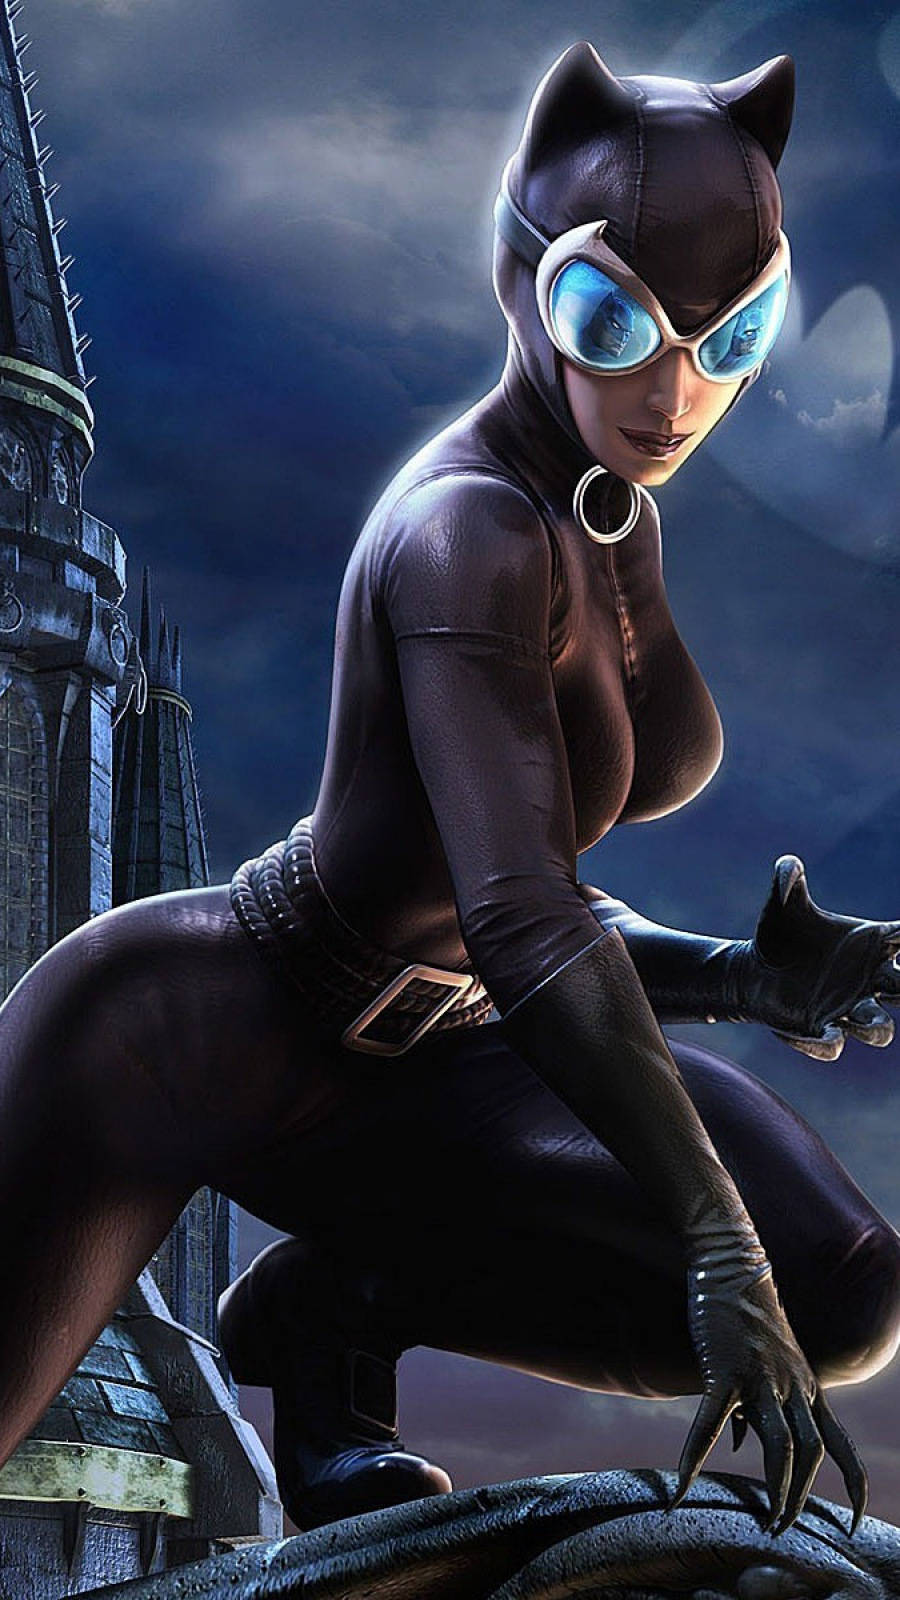 Cool Catwoman Movie Character Wallpaper